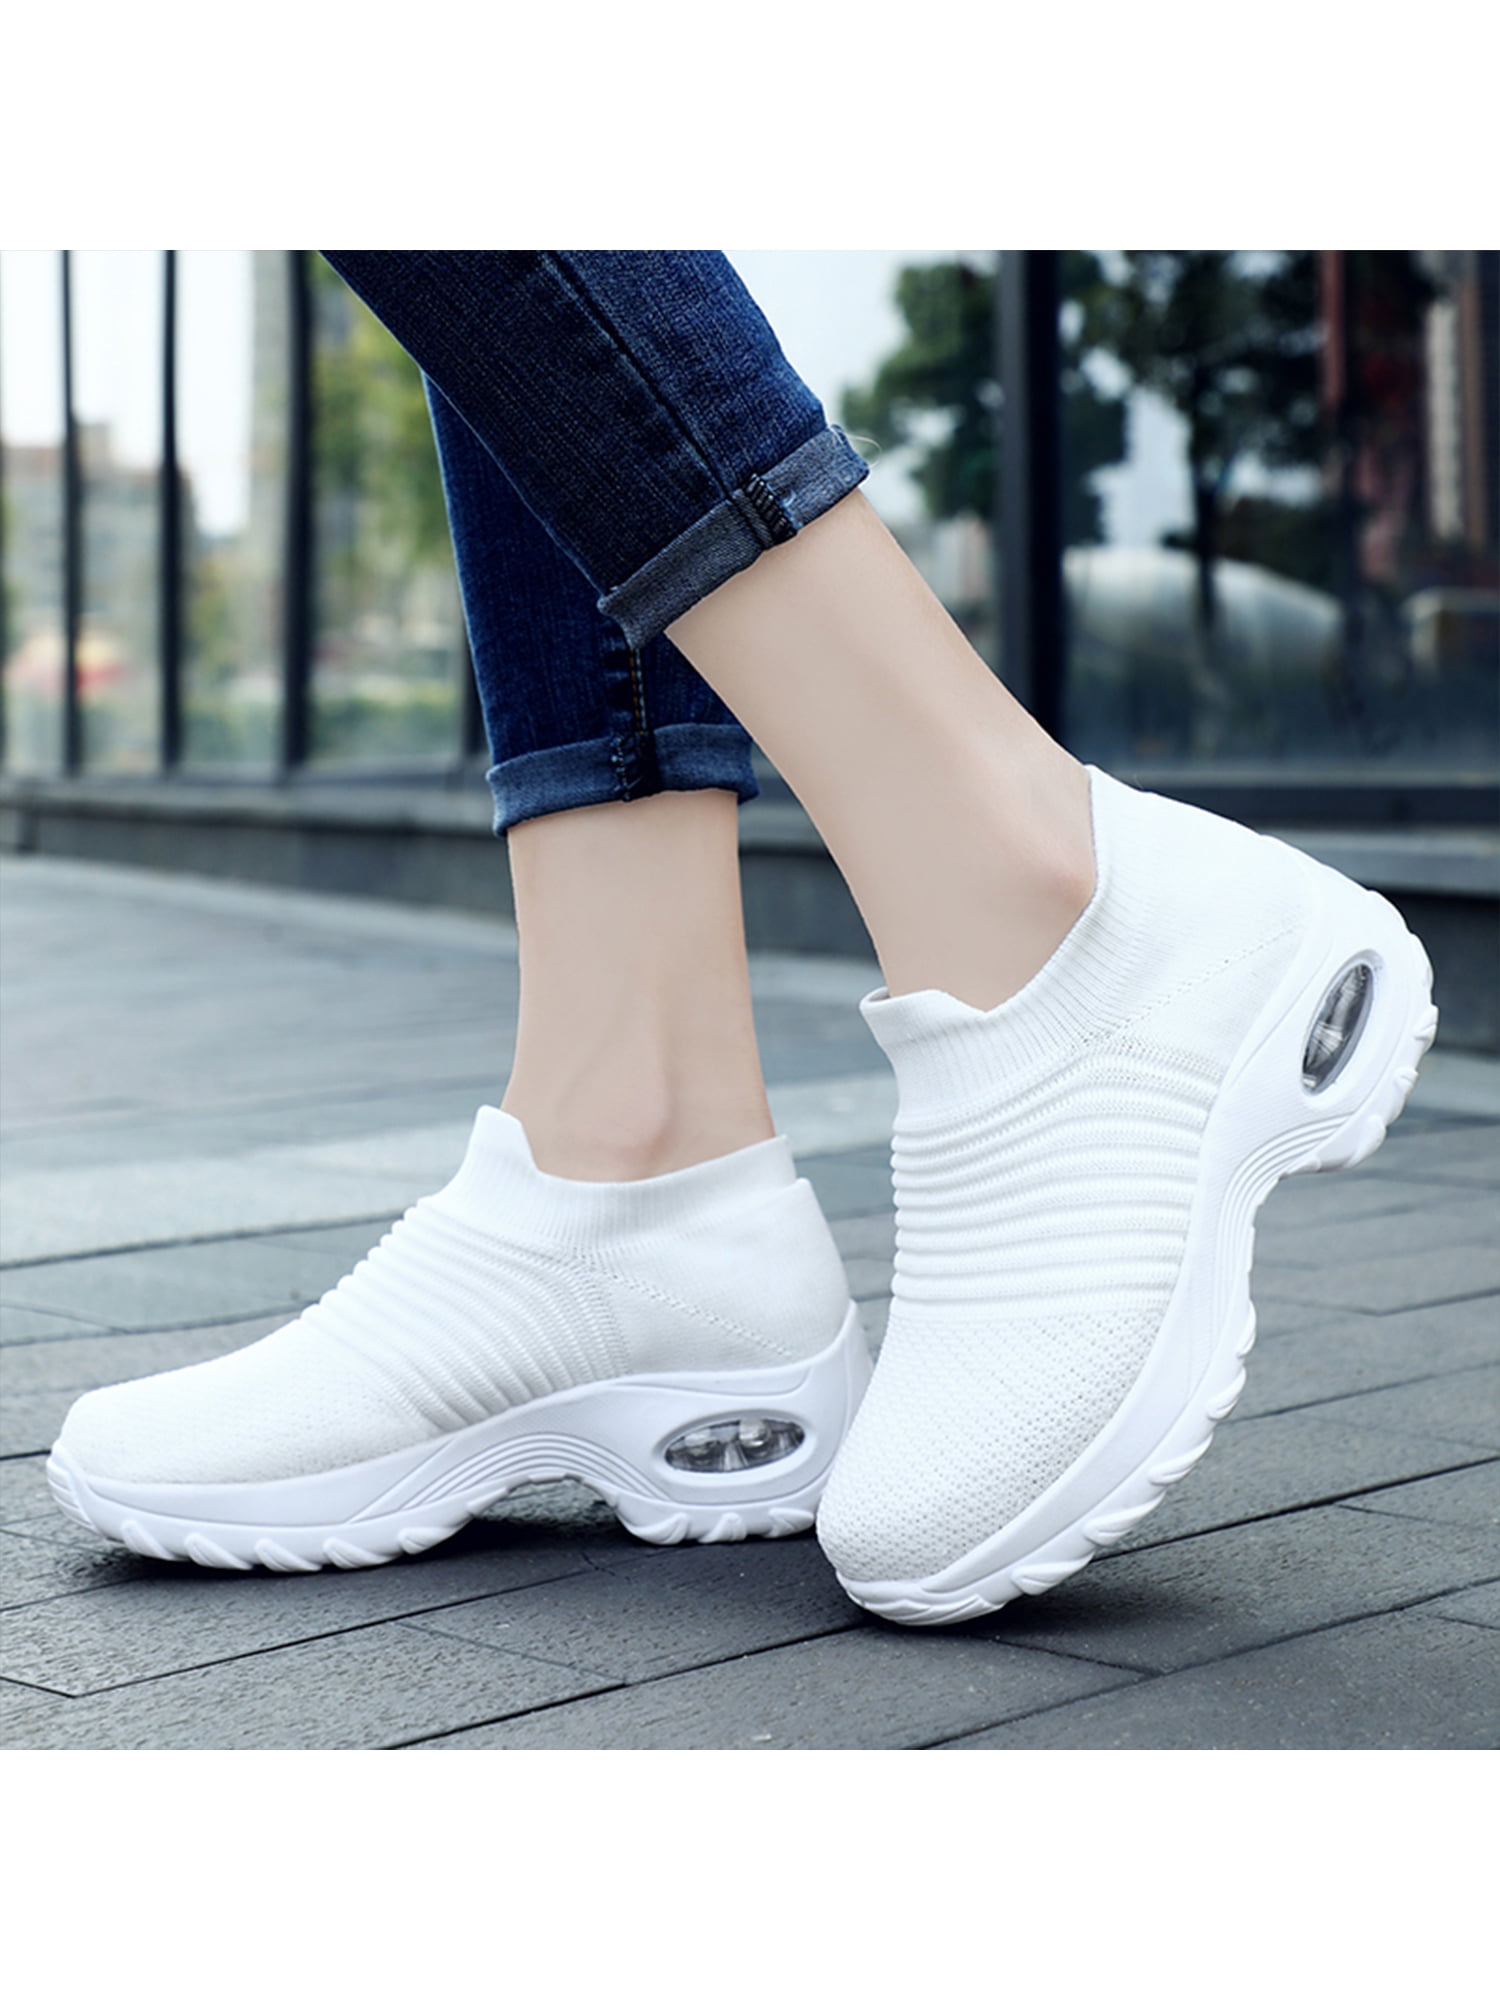 Womens Shoes Casual Flat Sneakers Gym Sport Walking Trainers Air Cushion Comfort 